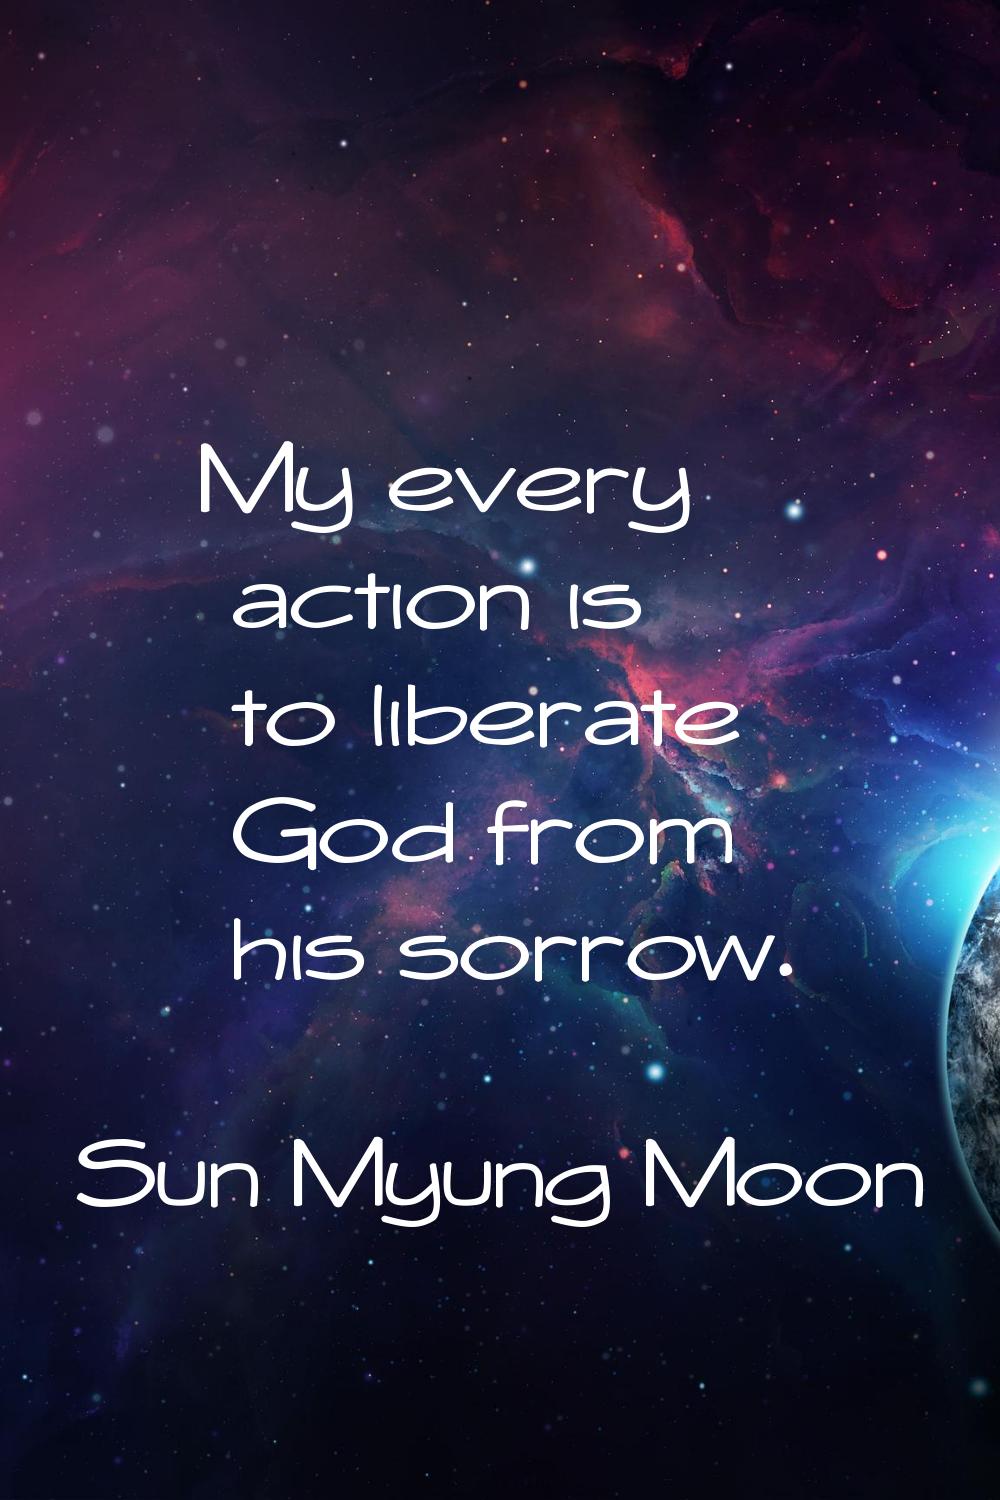 My every action is to liberate God from his sorrow.